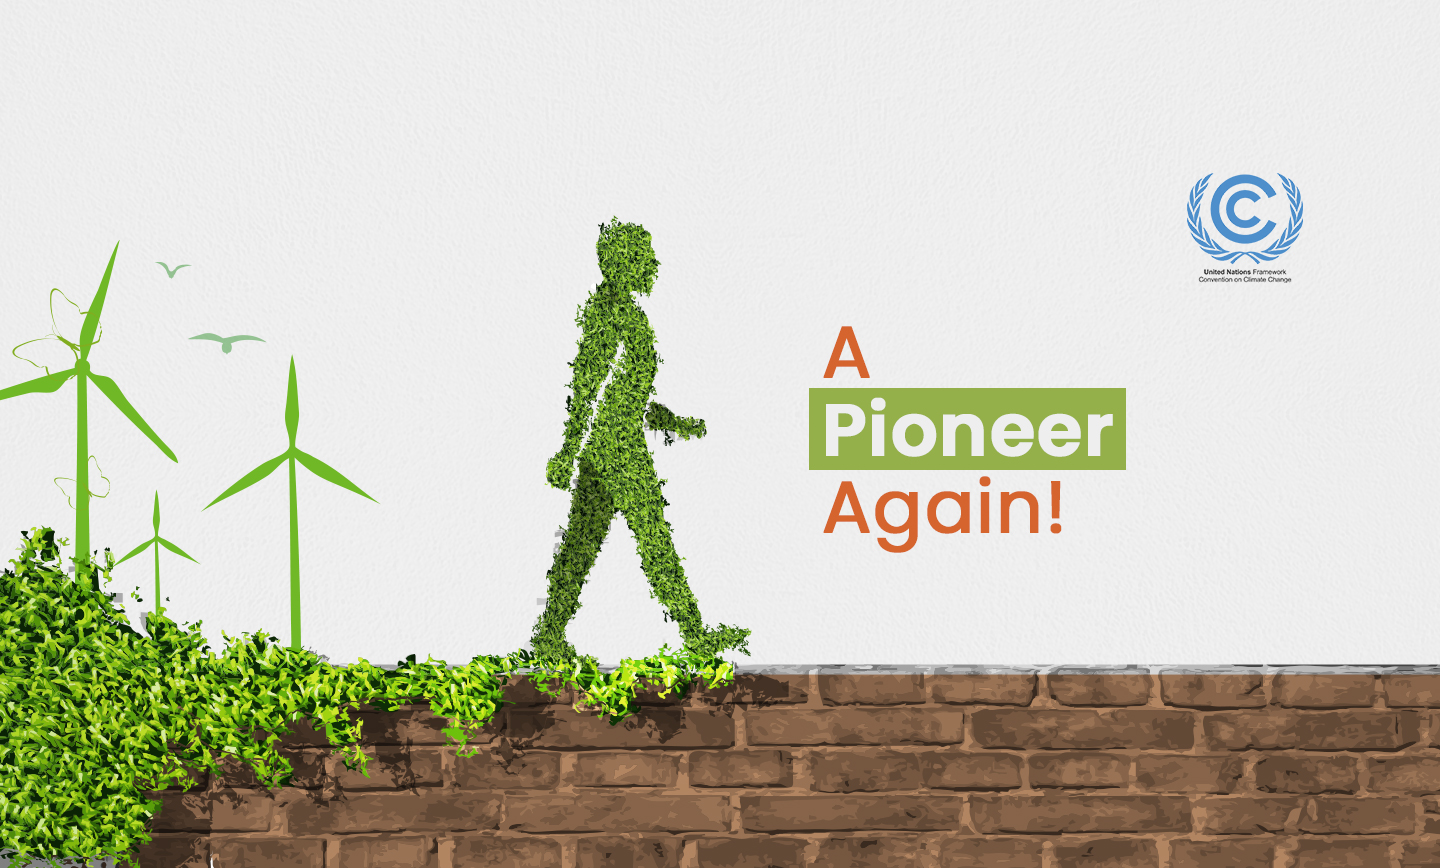 We are India's first and only Carbon-Neutral Integrated Services Venture.